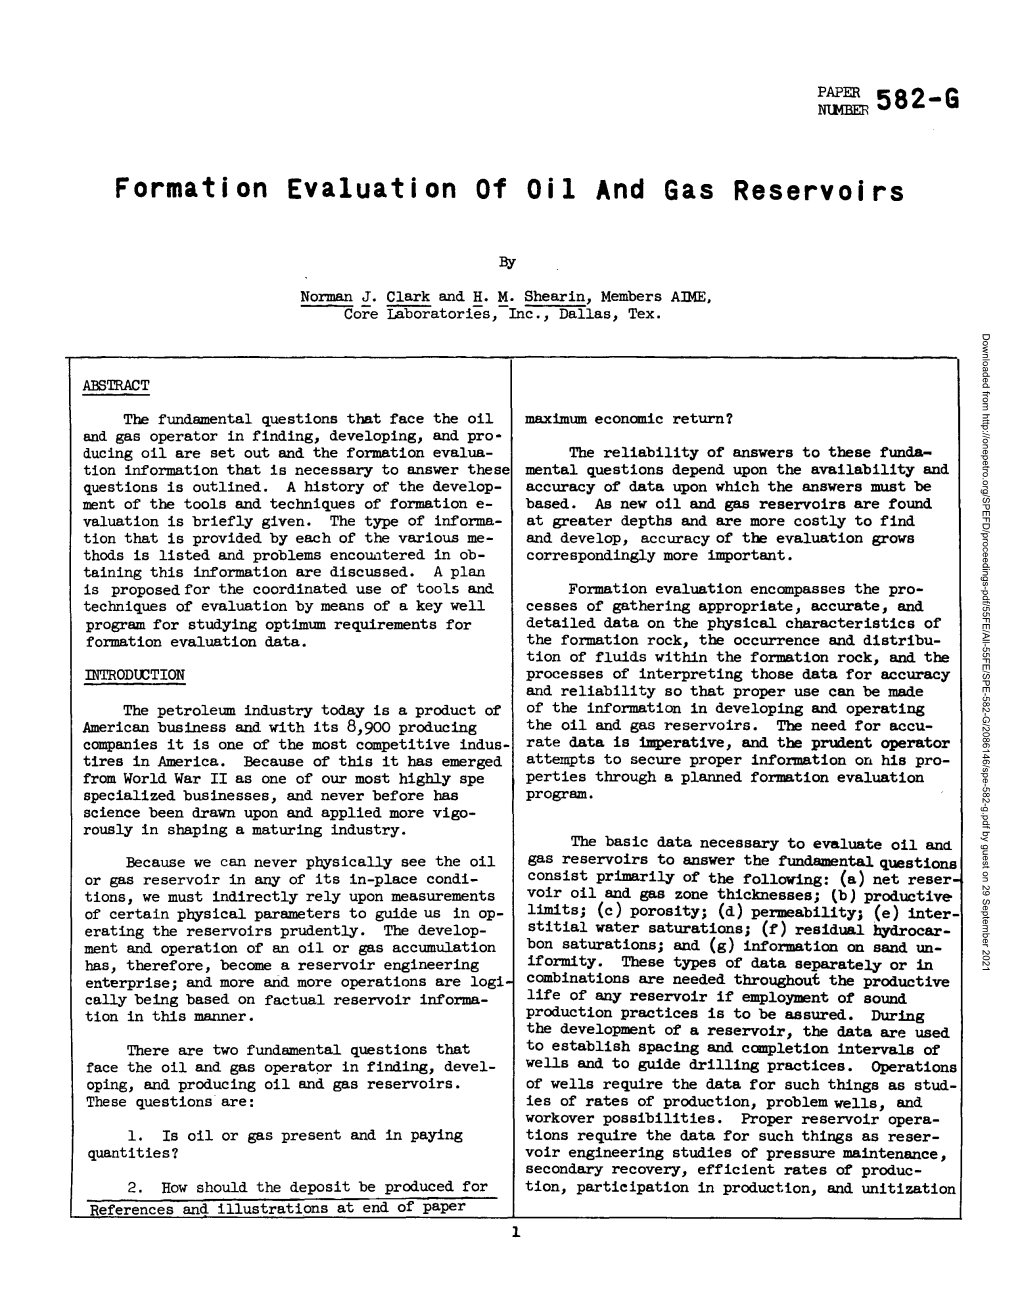 Formation Evaluation of Oil and Gas Reservoirs